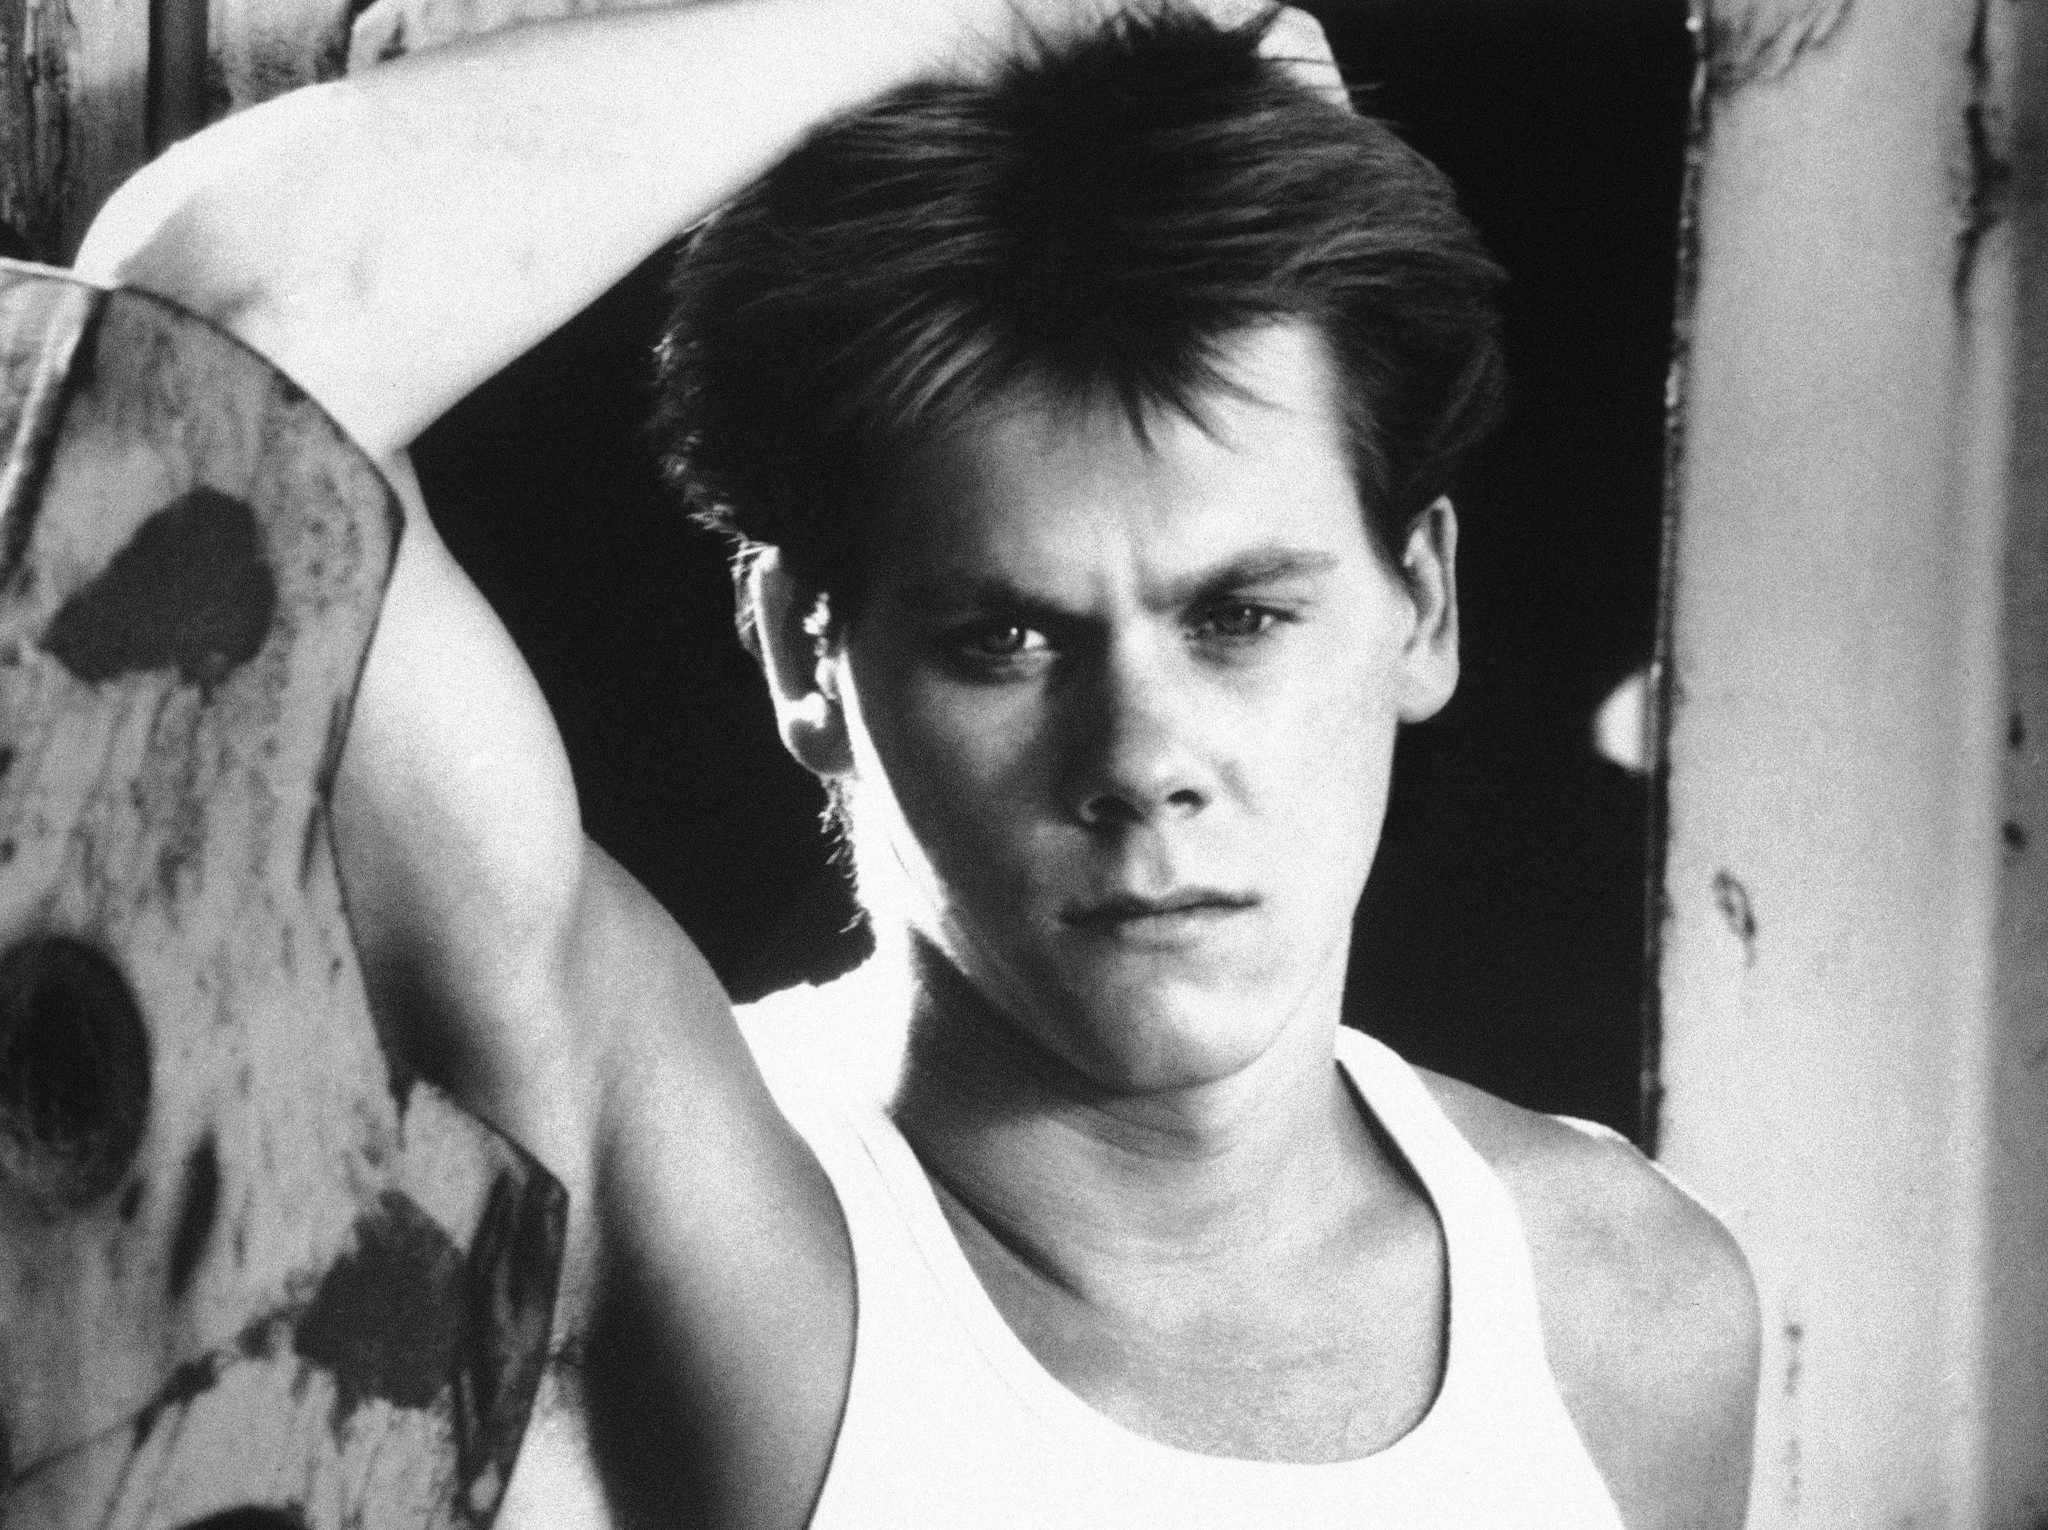 Kevin Bacon Photo Of Pics Wallpaper Theplace2